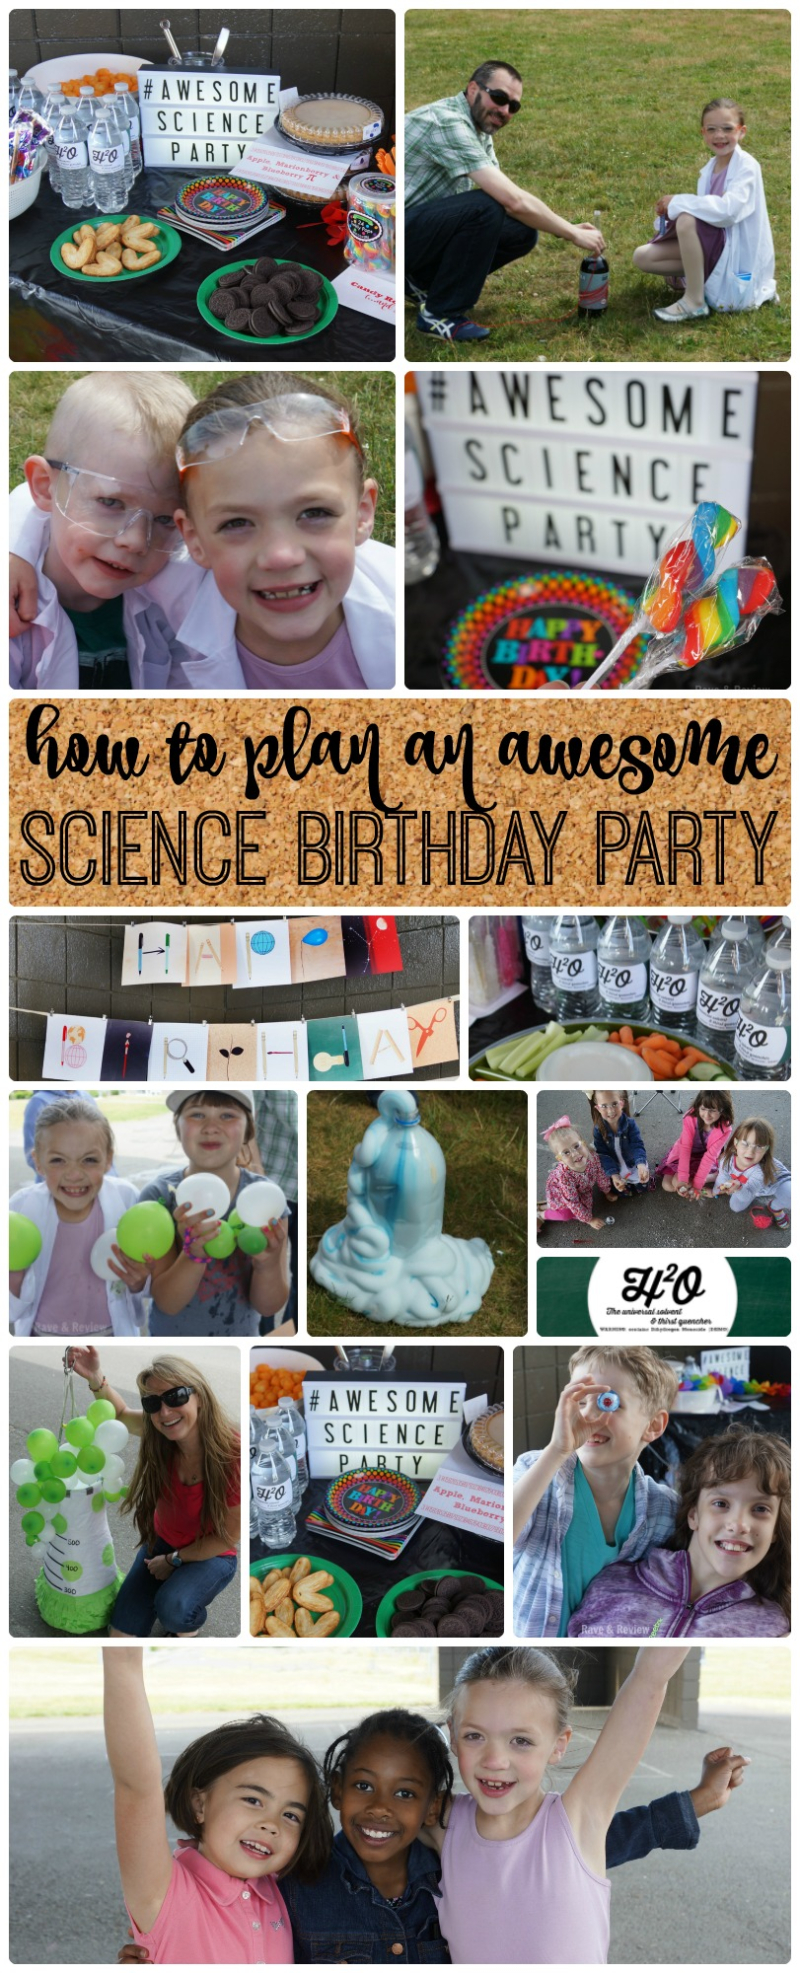 How to plan an awesome science birthday party